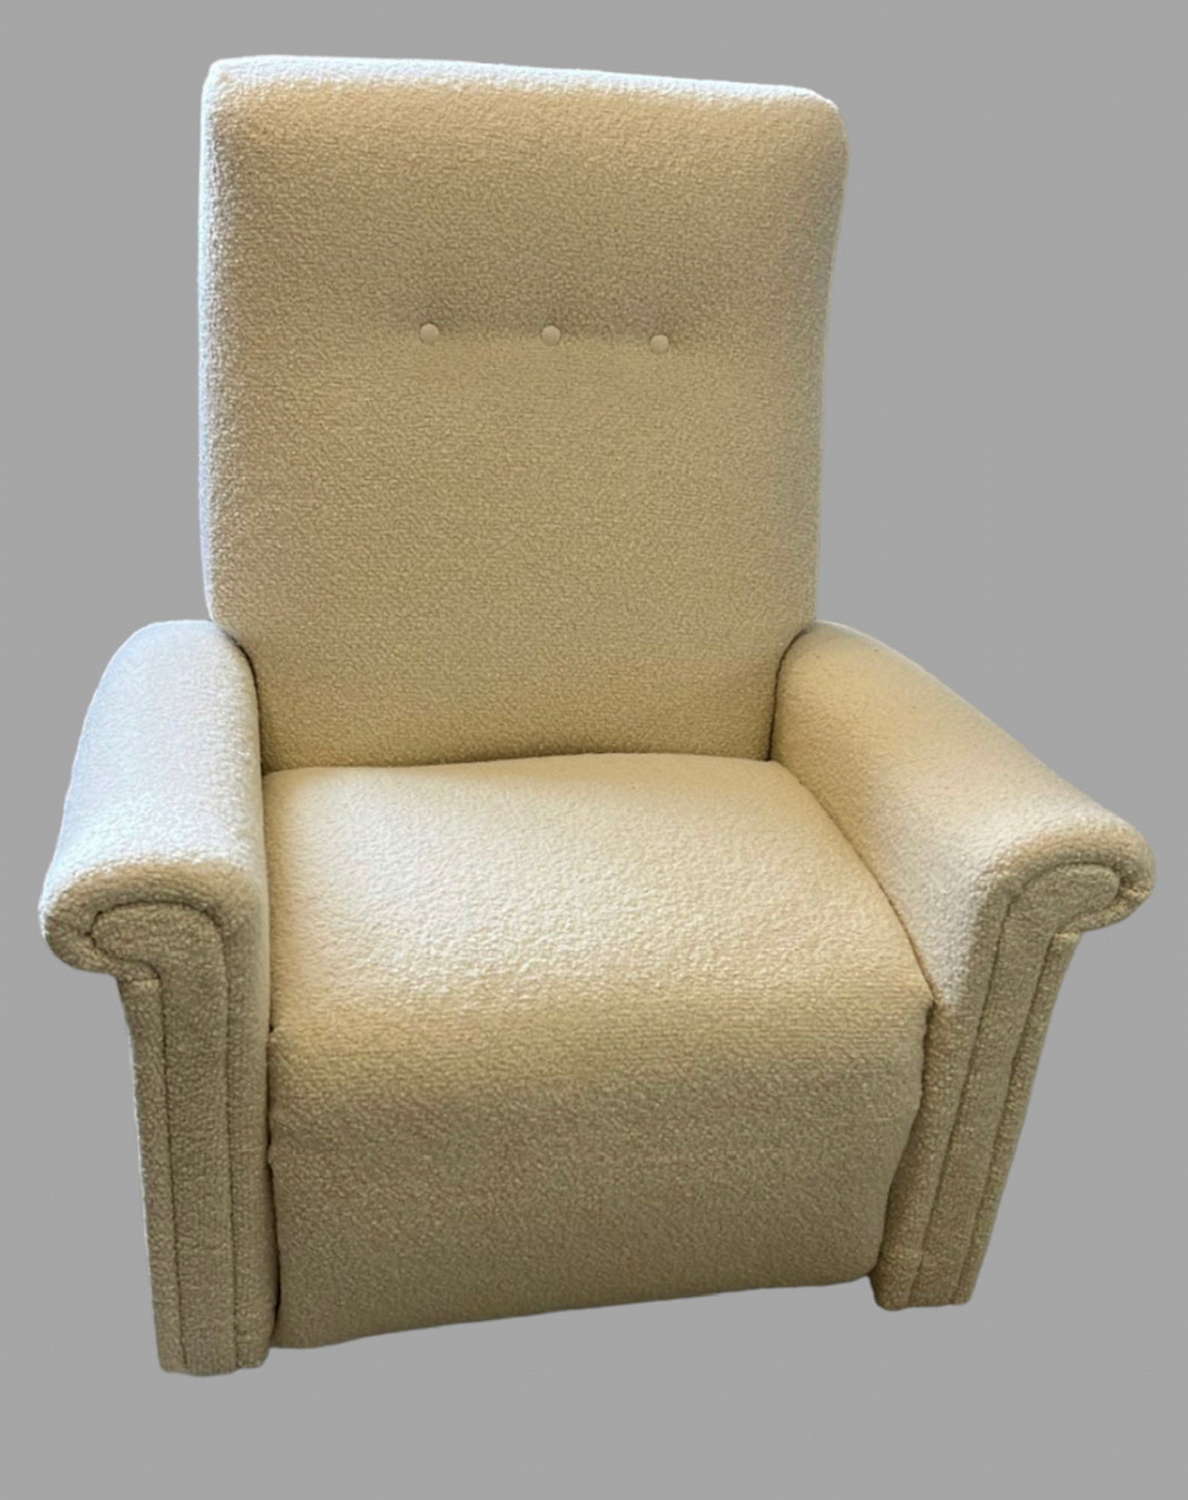 An Attractive Re Upholstered Parker Knoll Style Armchair